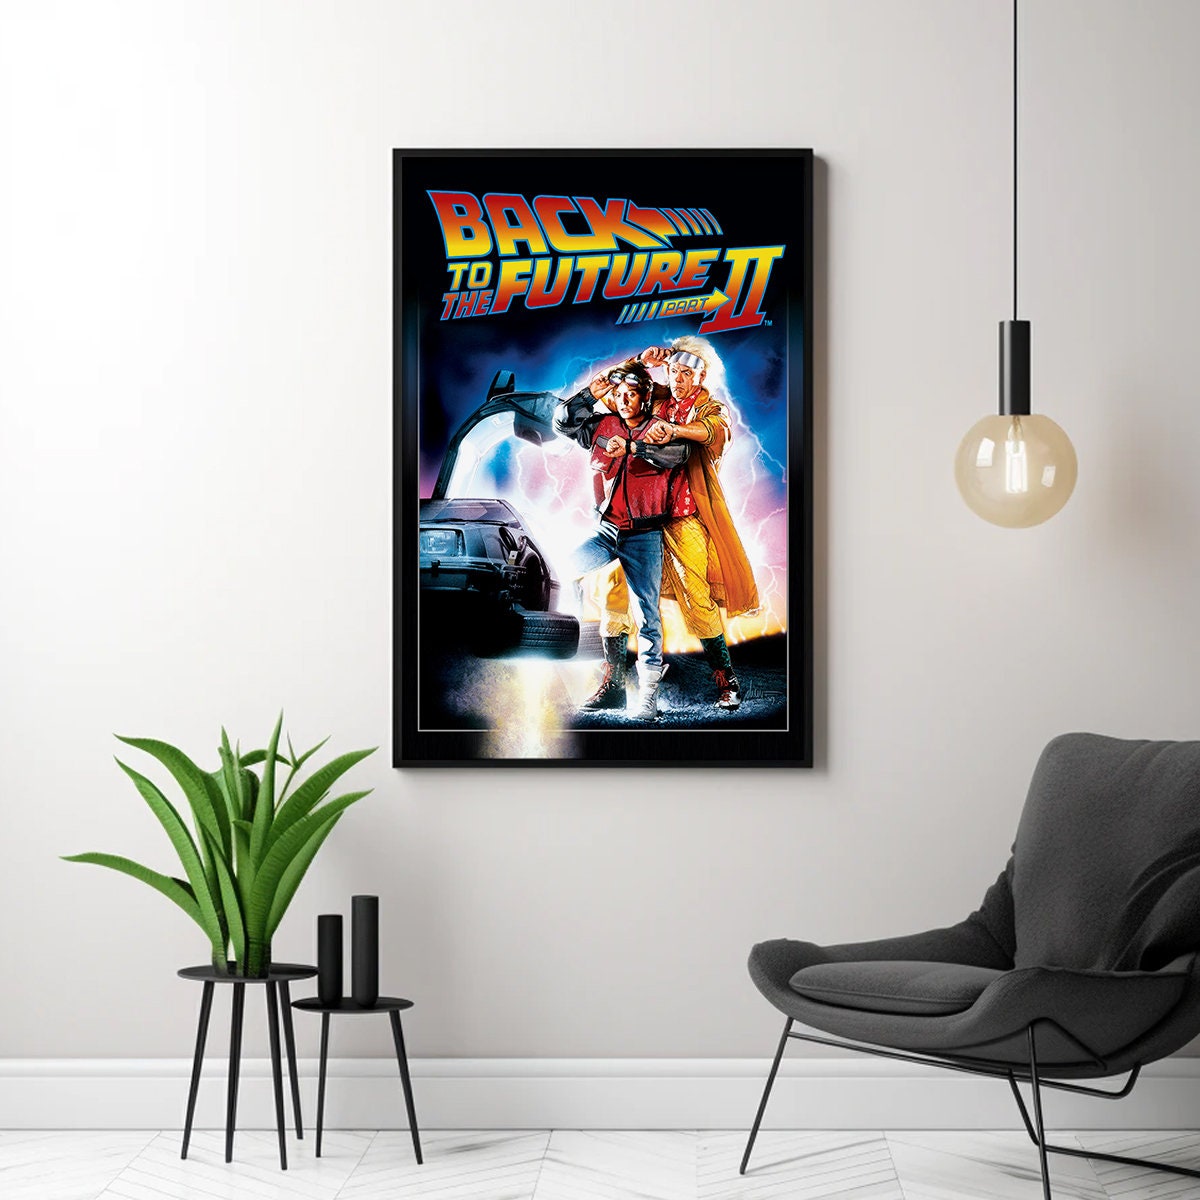 Back to the Future Part II (1989) Poster